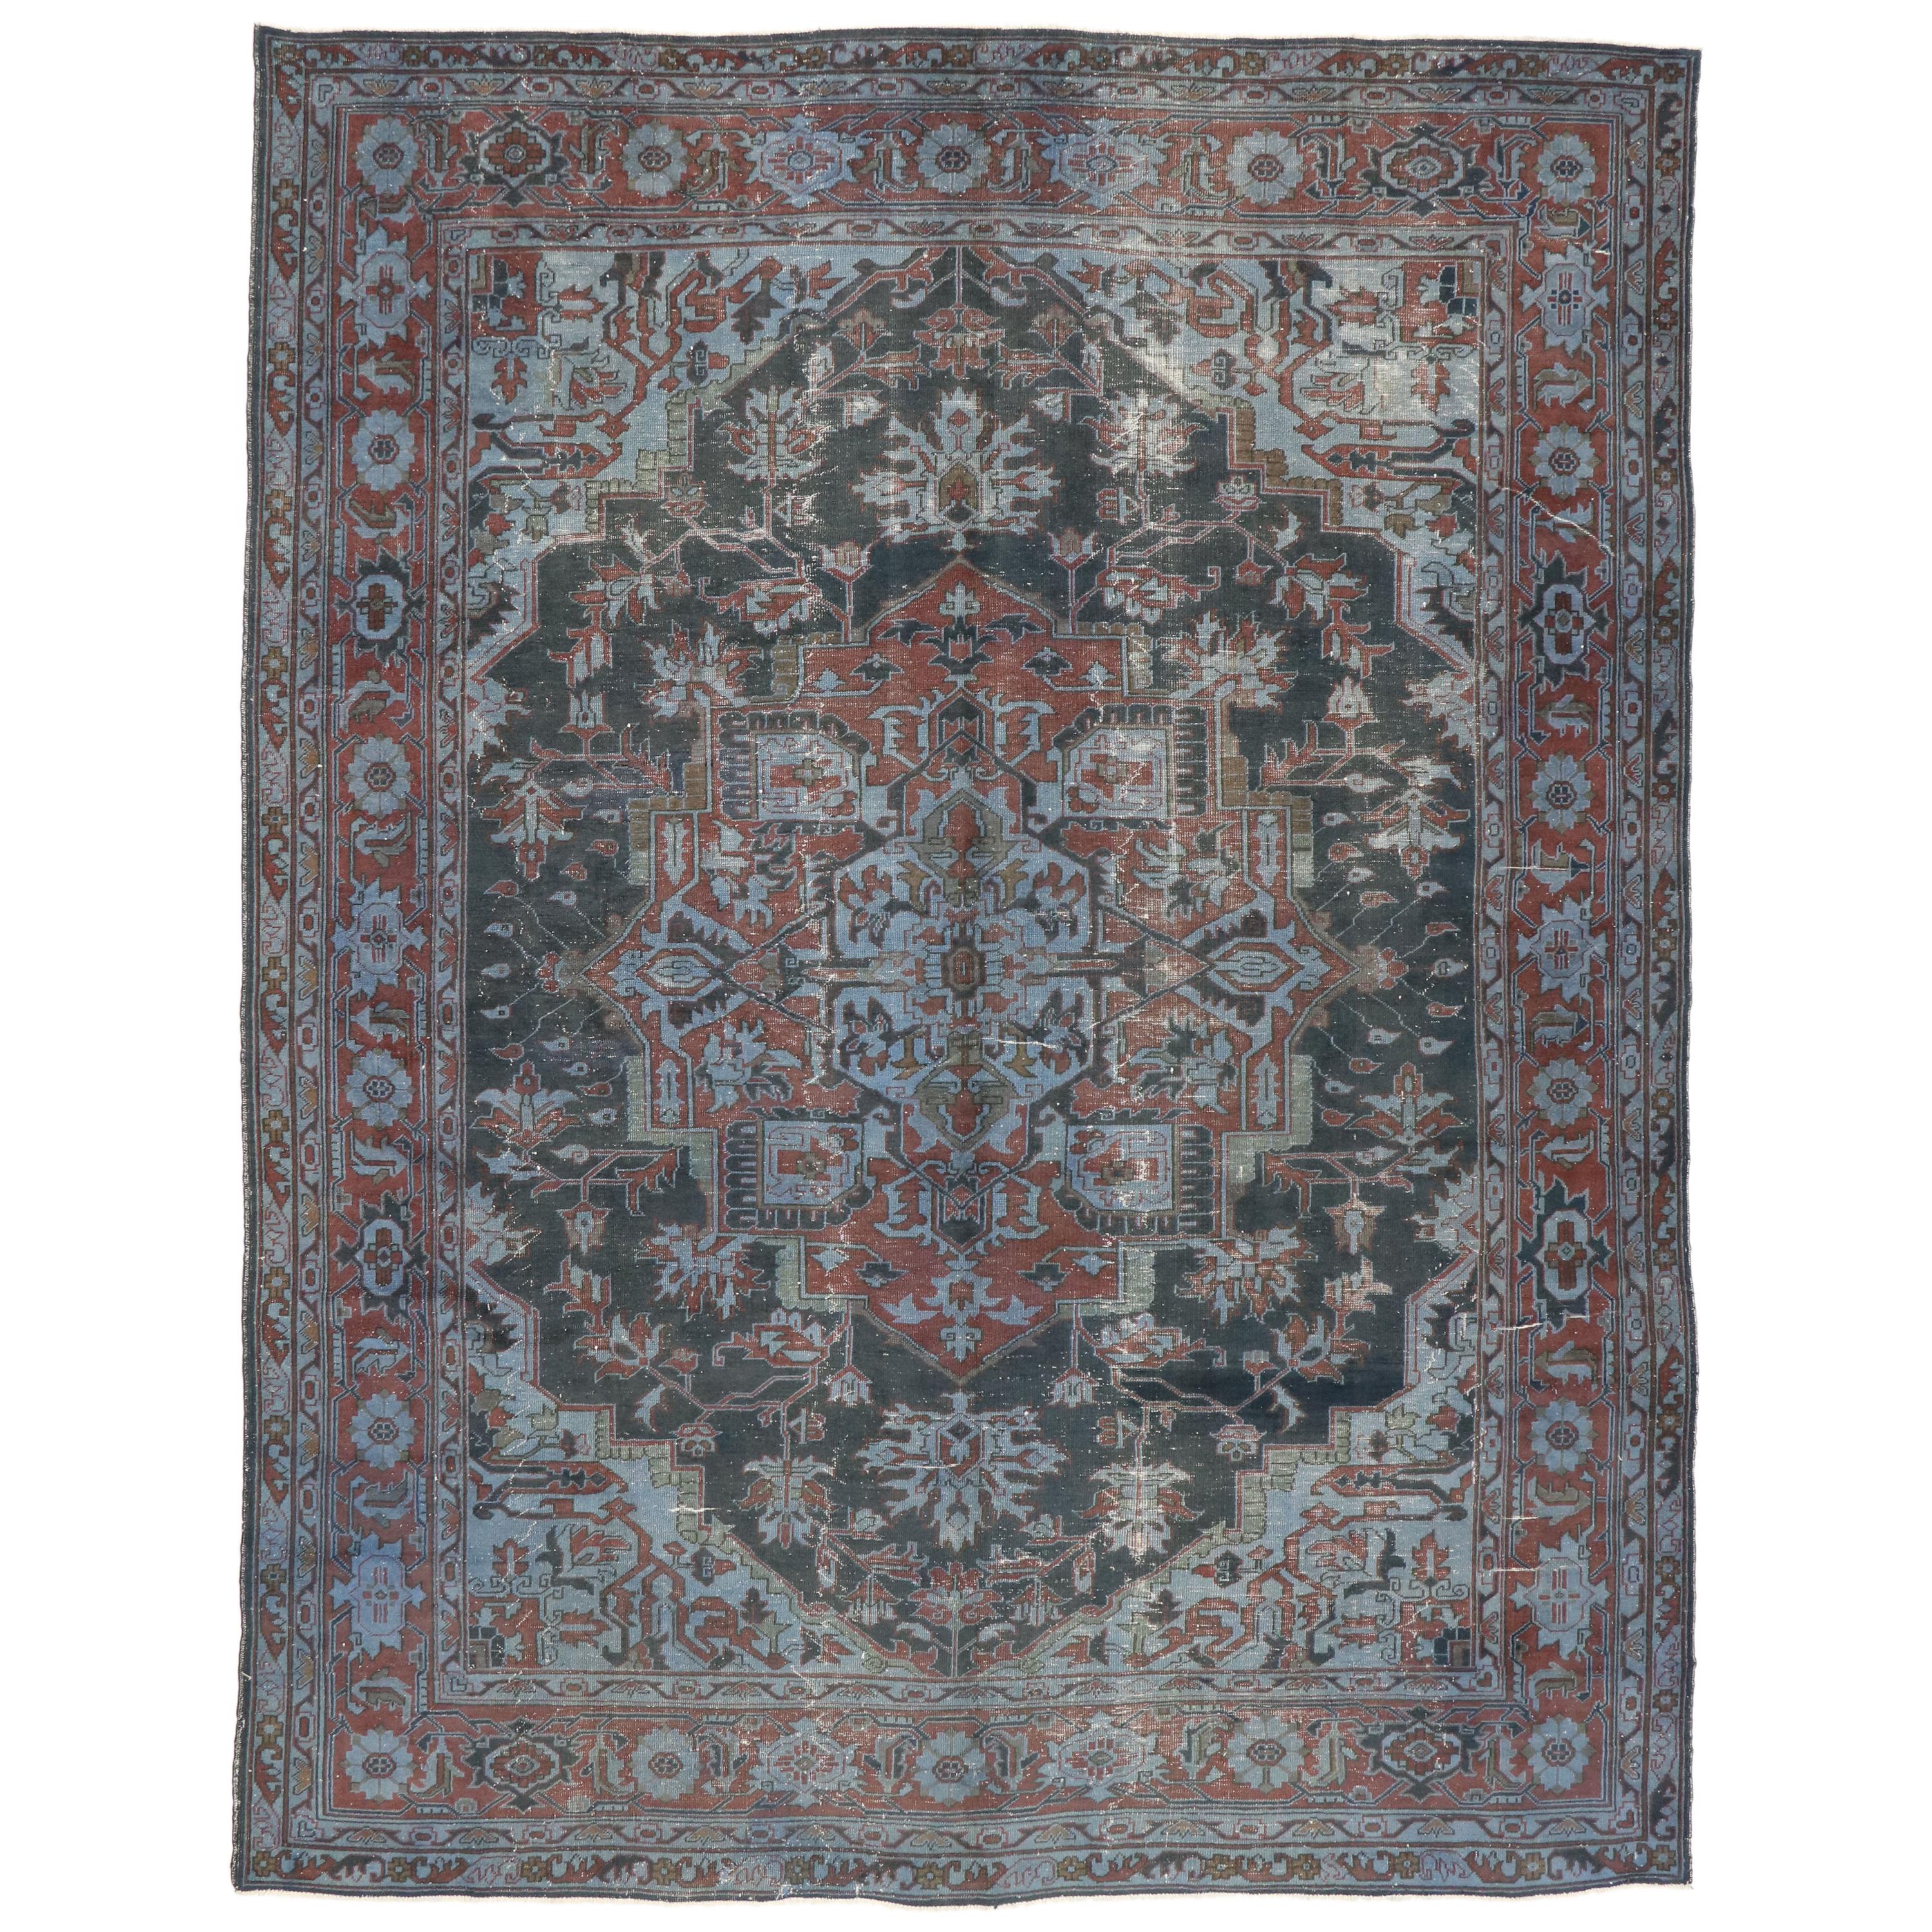 Distressed Antique Turkish Overdyed Rug with Heriz Design and Industrial Style